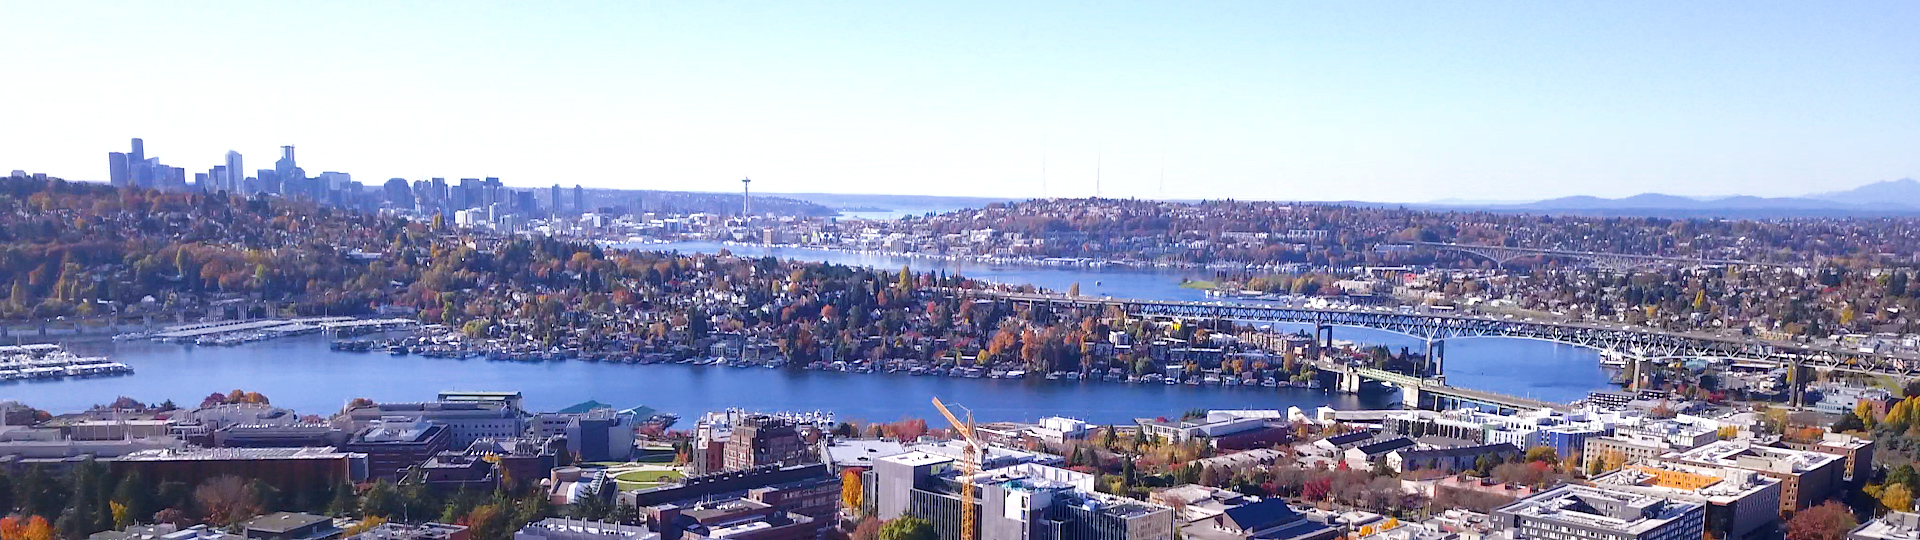 Drone shot of Seattle, Lake Union from UW campus